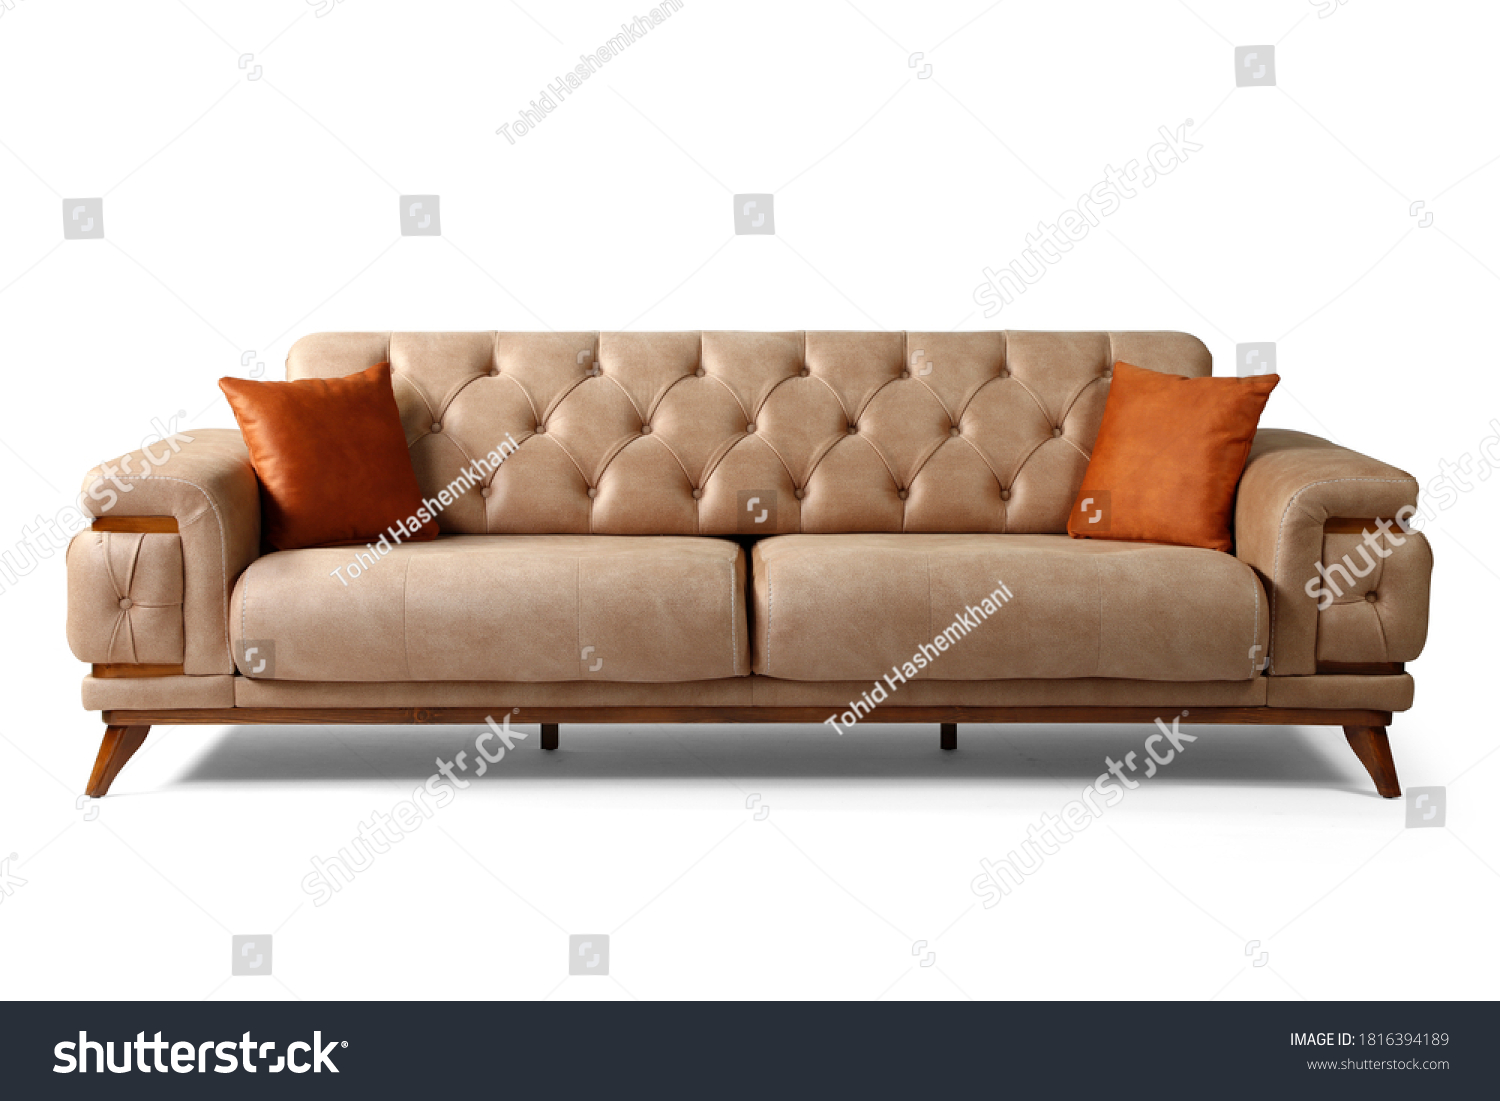 Modern sofa isolated on white background. front view #1816394189